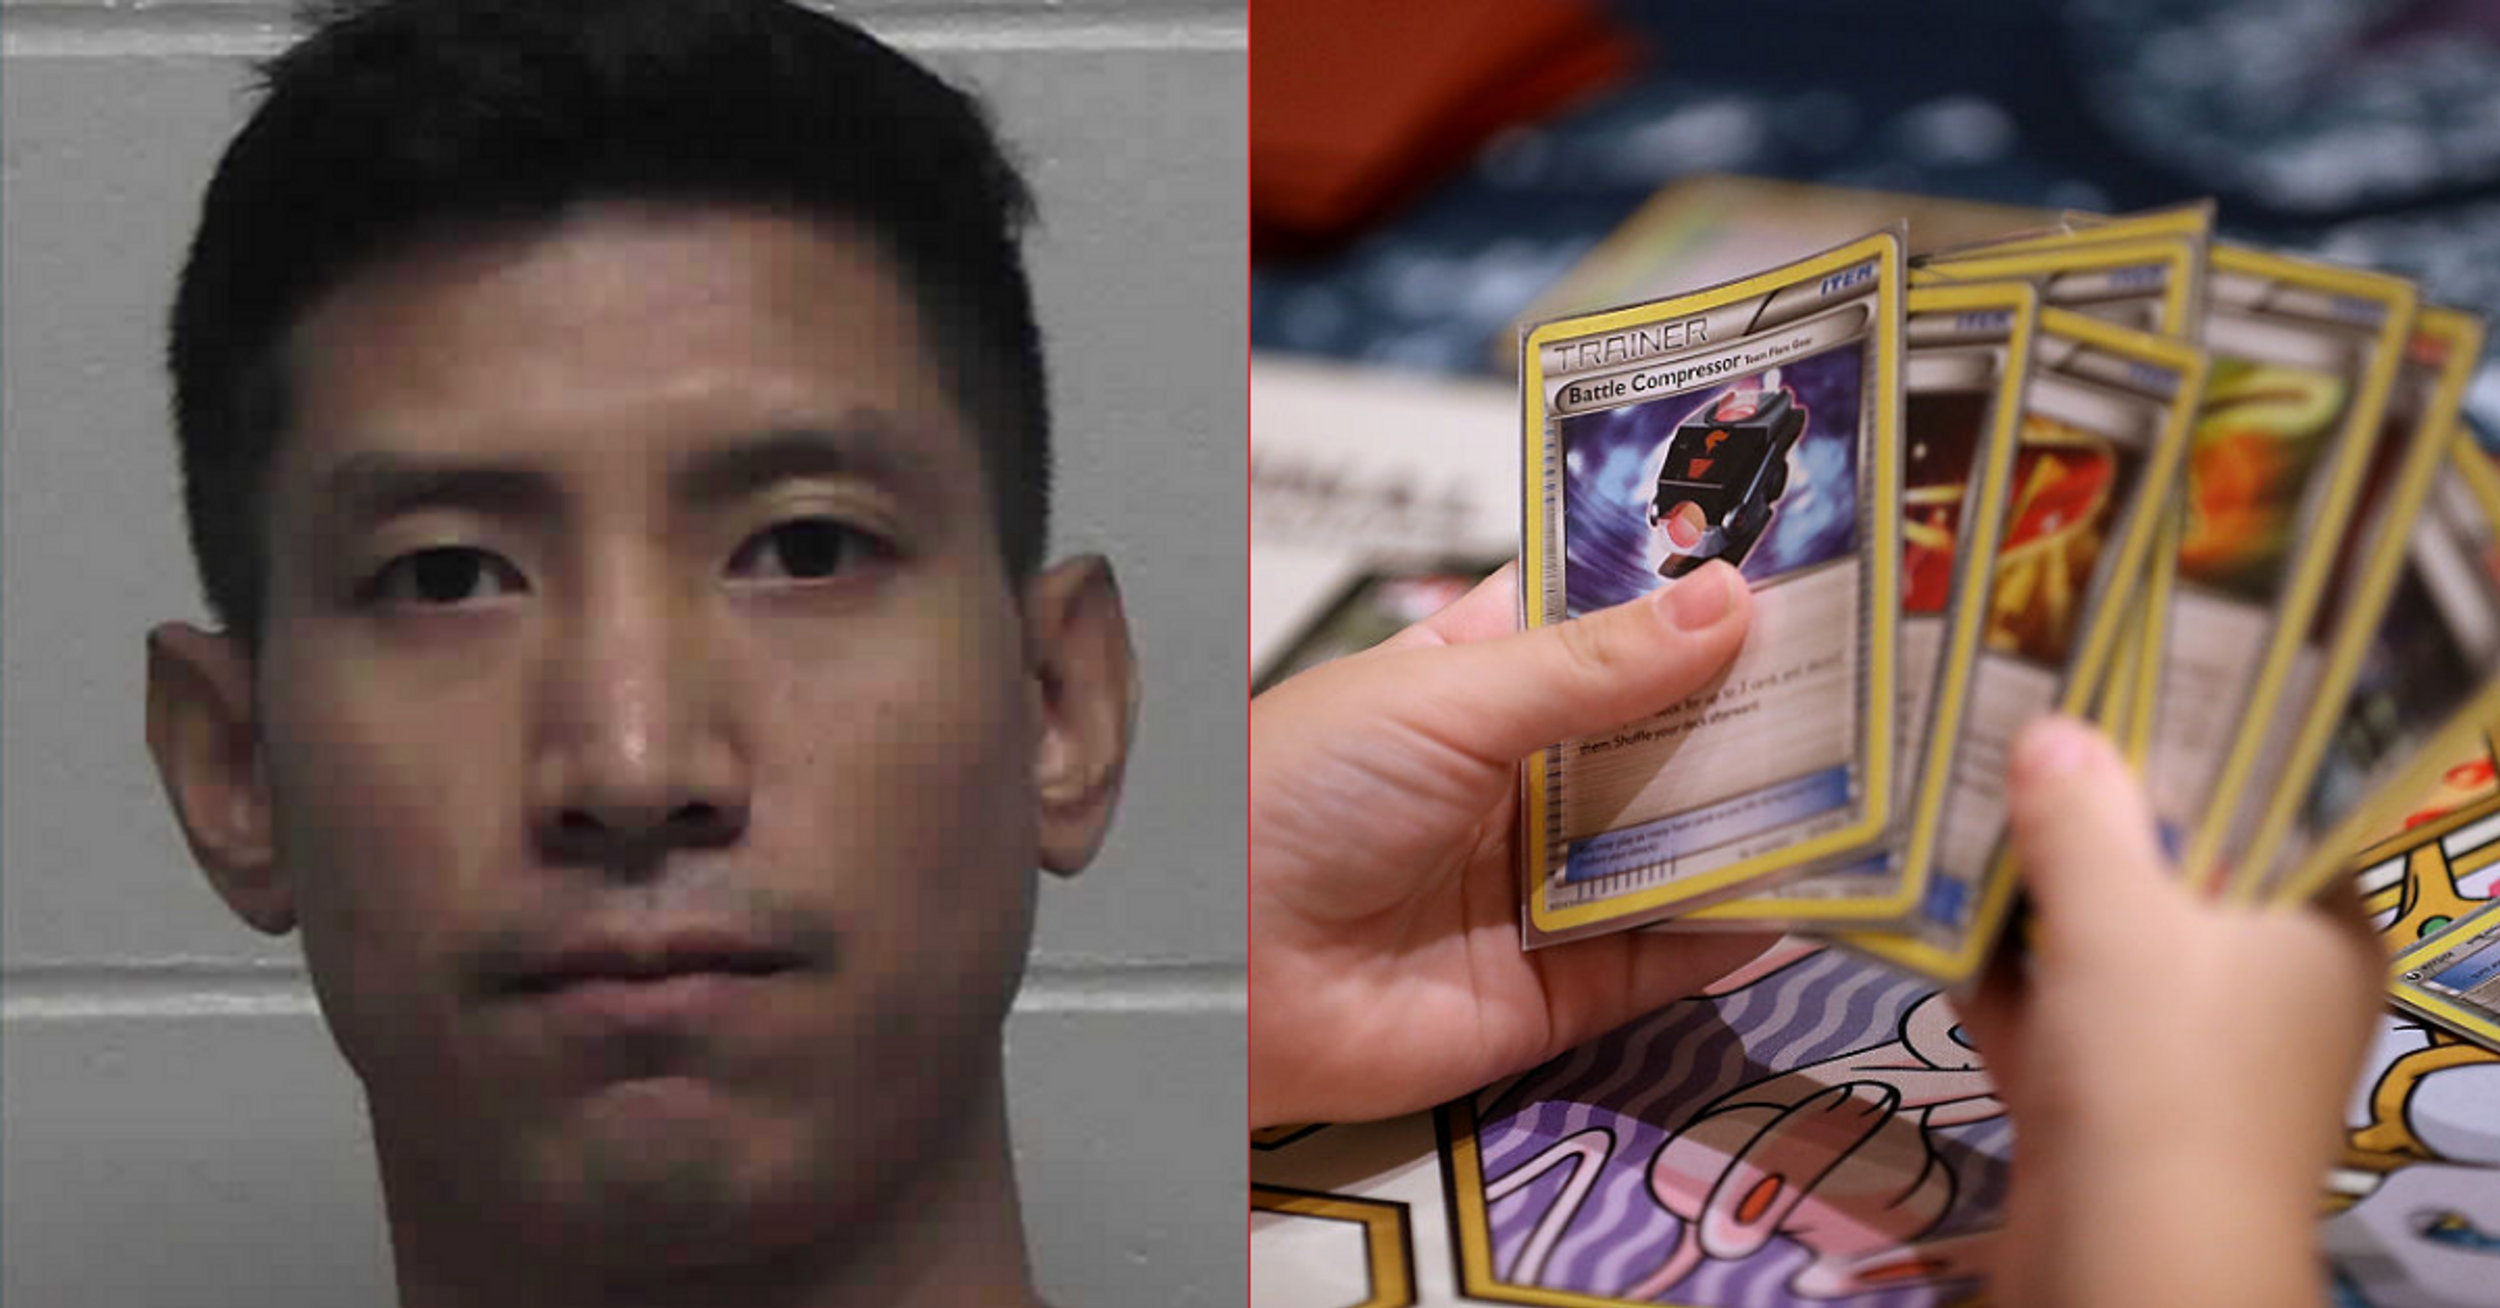 Georgia Man Sentenced To Prison After Spending $57k In Pandemic Relief On Pokémon Card